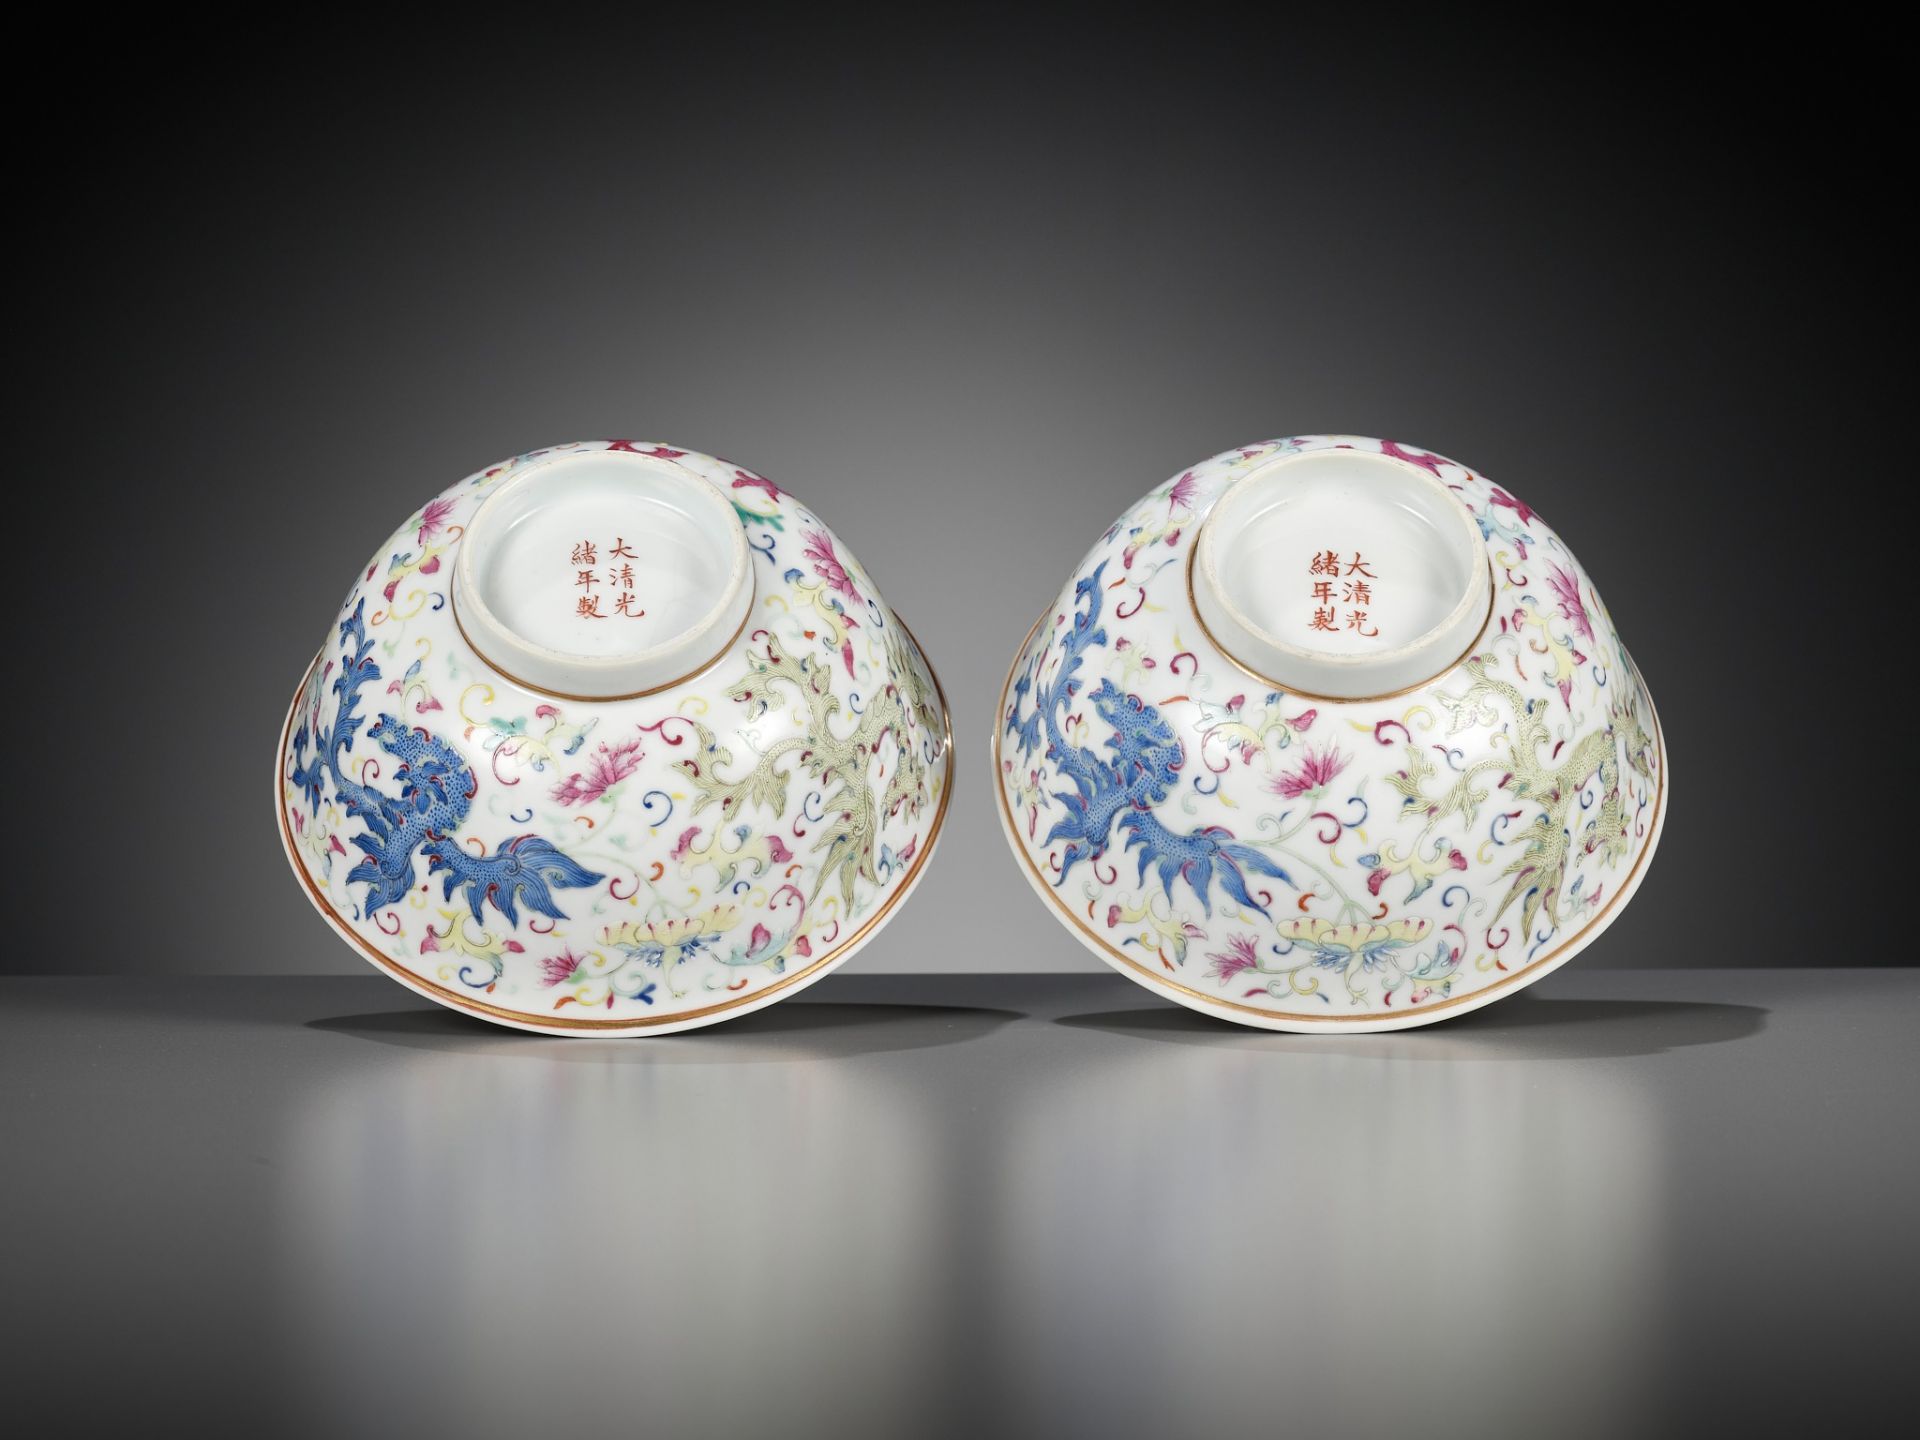 A PAIR OF FAMILLE-ROSE 'PHOENIX' BOWLS, GUANGXU MARK AND PERIOD - Image 11 of 16